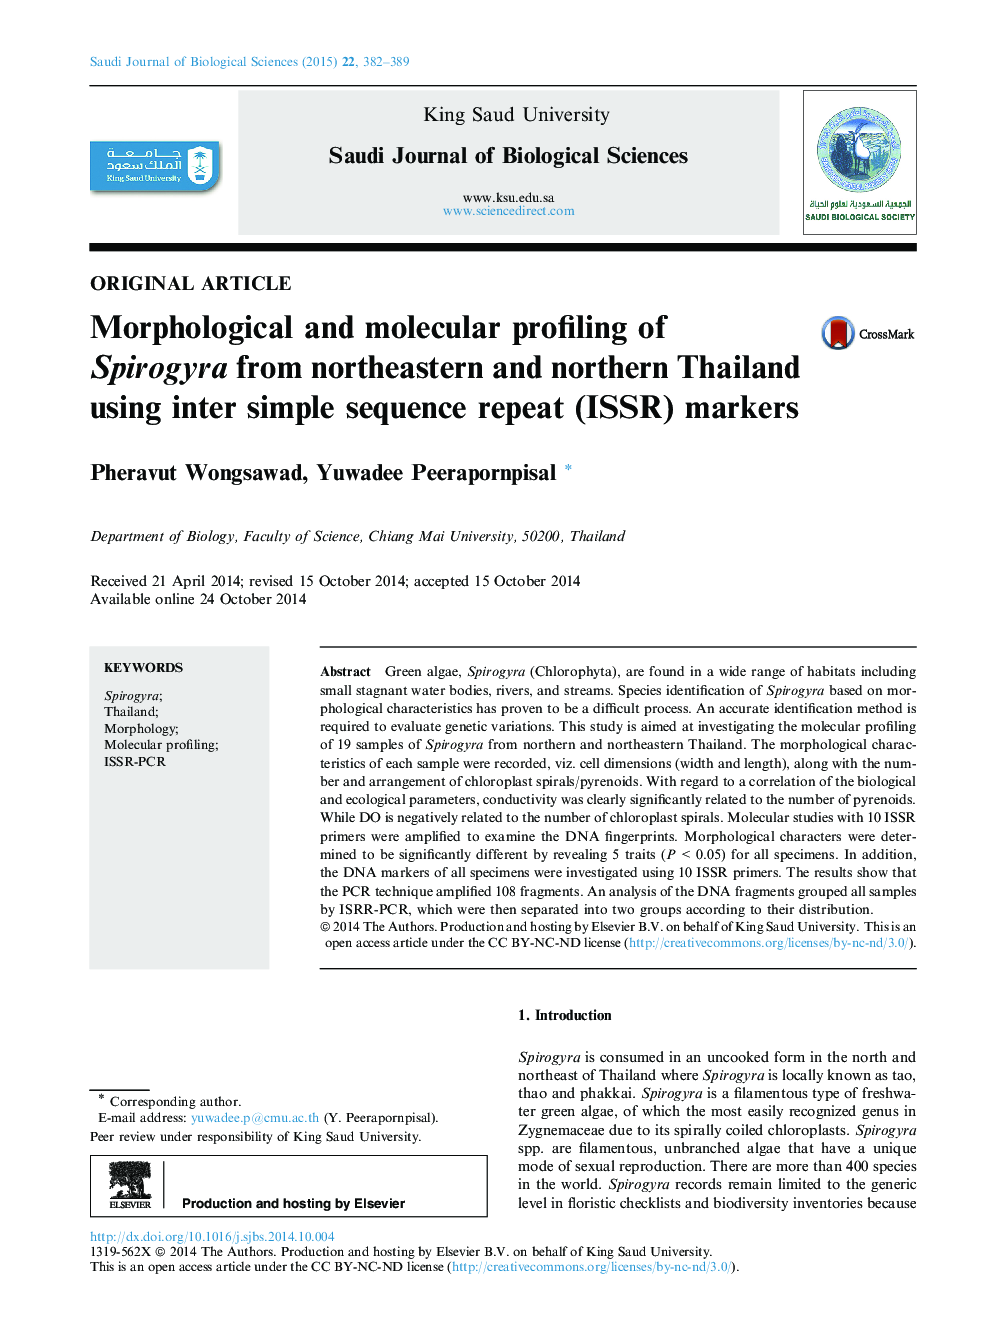 Morphological and molecular profiling of Spirogyra from northeastern and northern Thailand using inter simple sequence repeat (ISSR) markers 